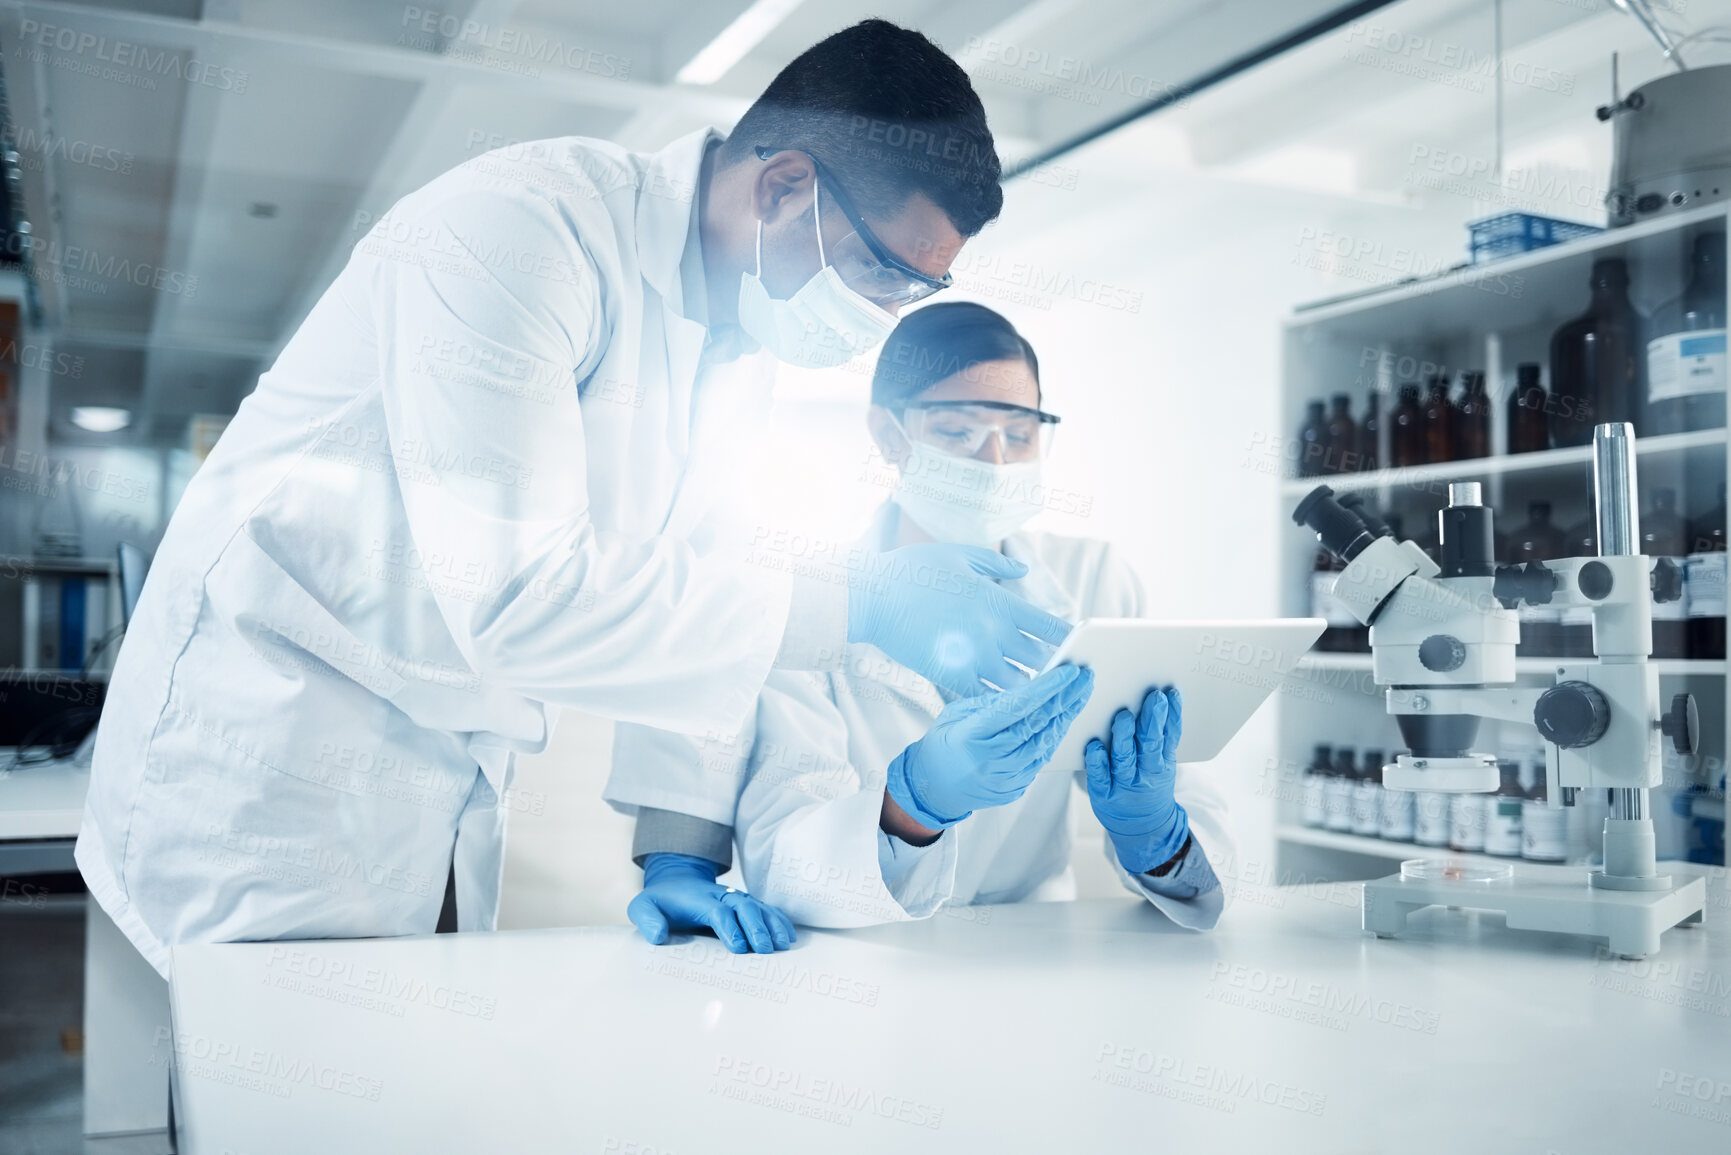 Buy stock photo Shot of two young scientists using a digital tablet while conducting medical research in a laboratory